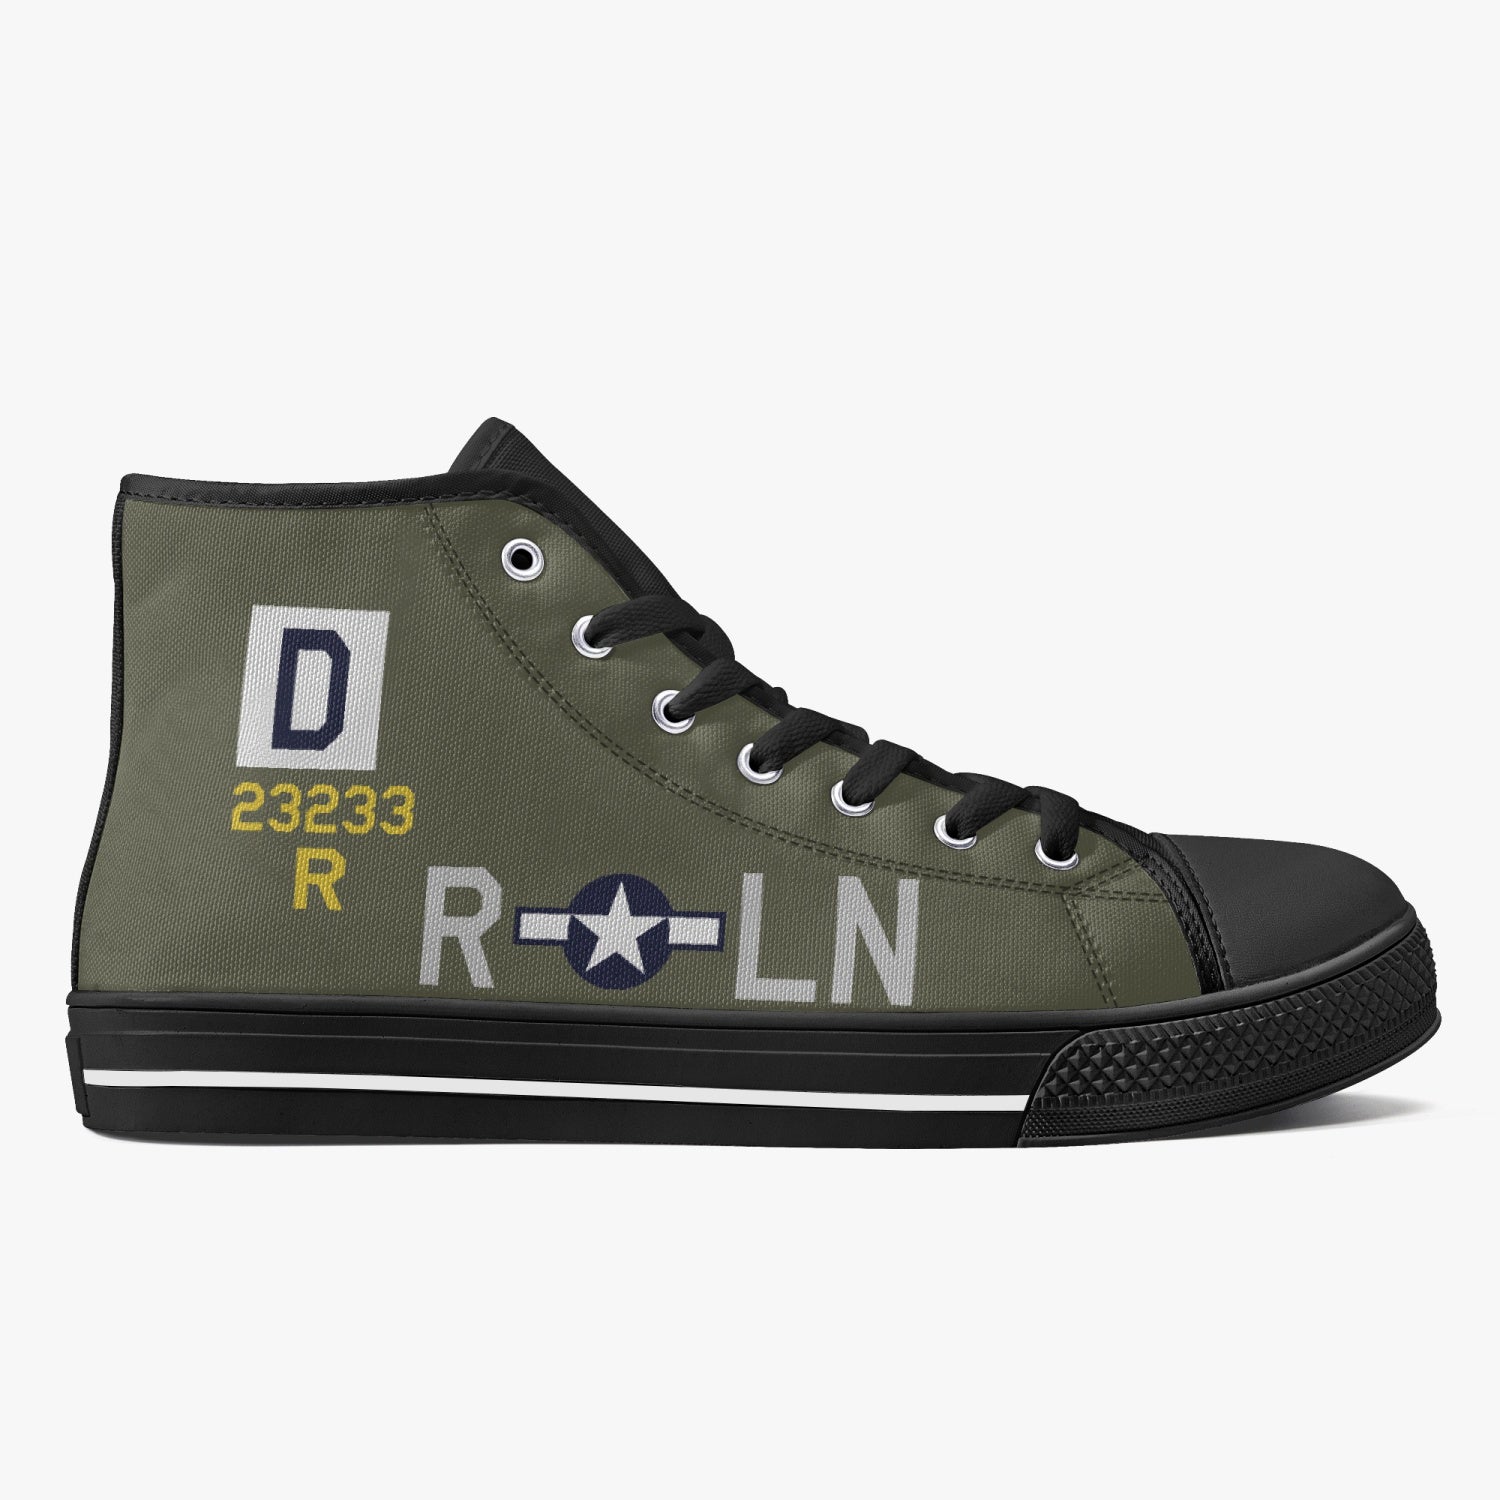 B-17 "Our Baby" High Top Canvas Shoes - I Love a Hangar